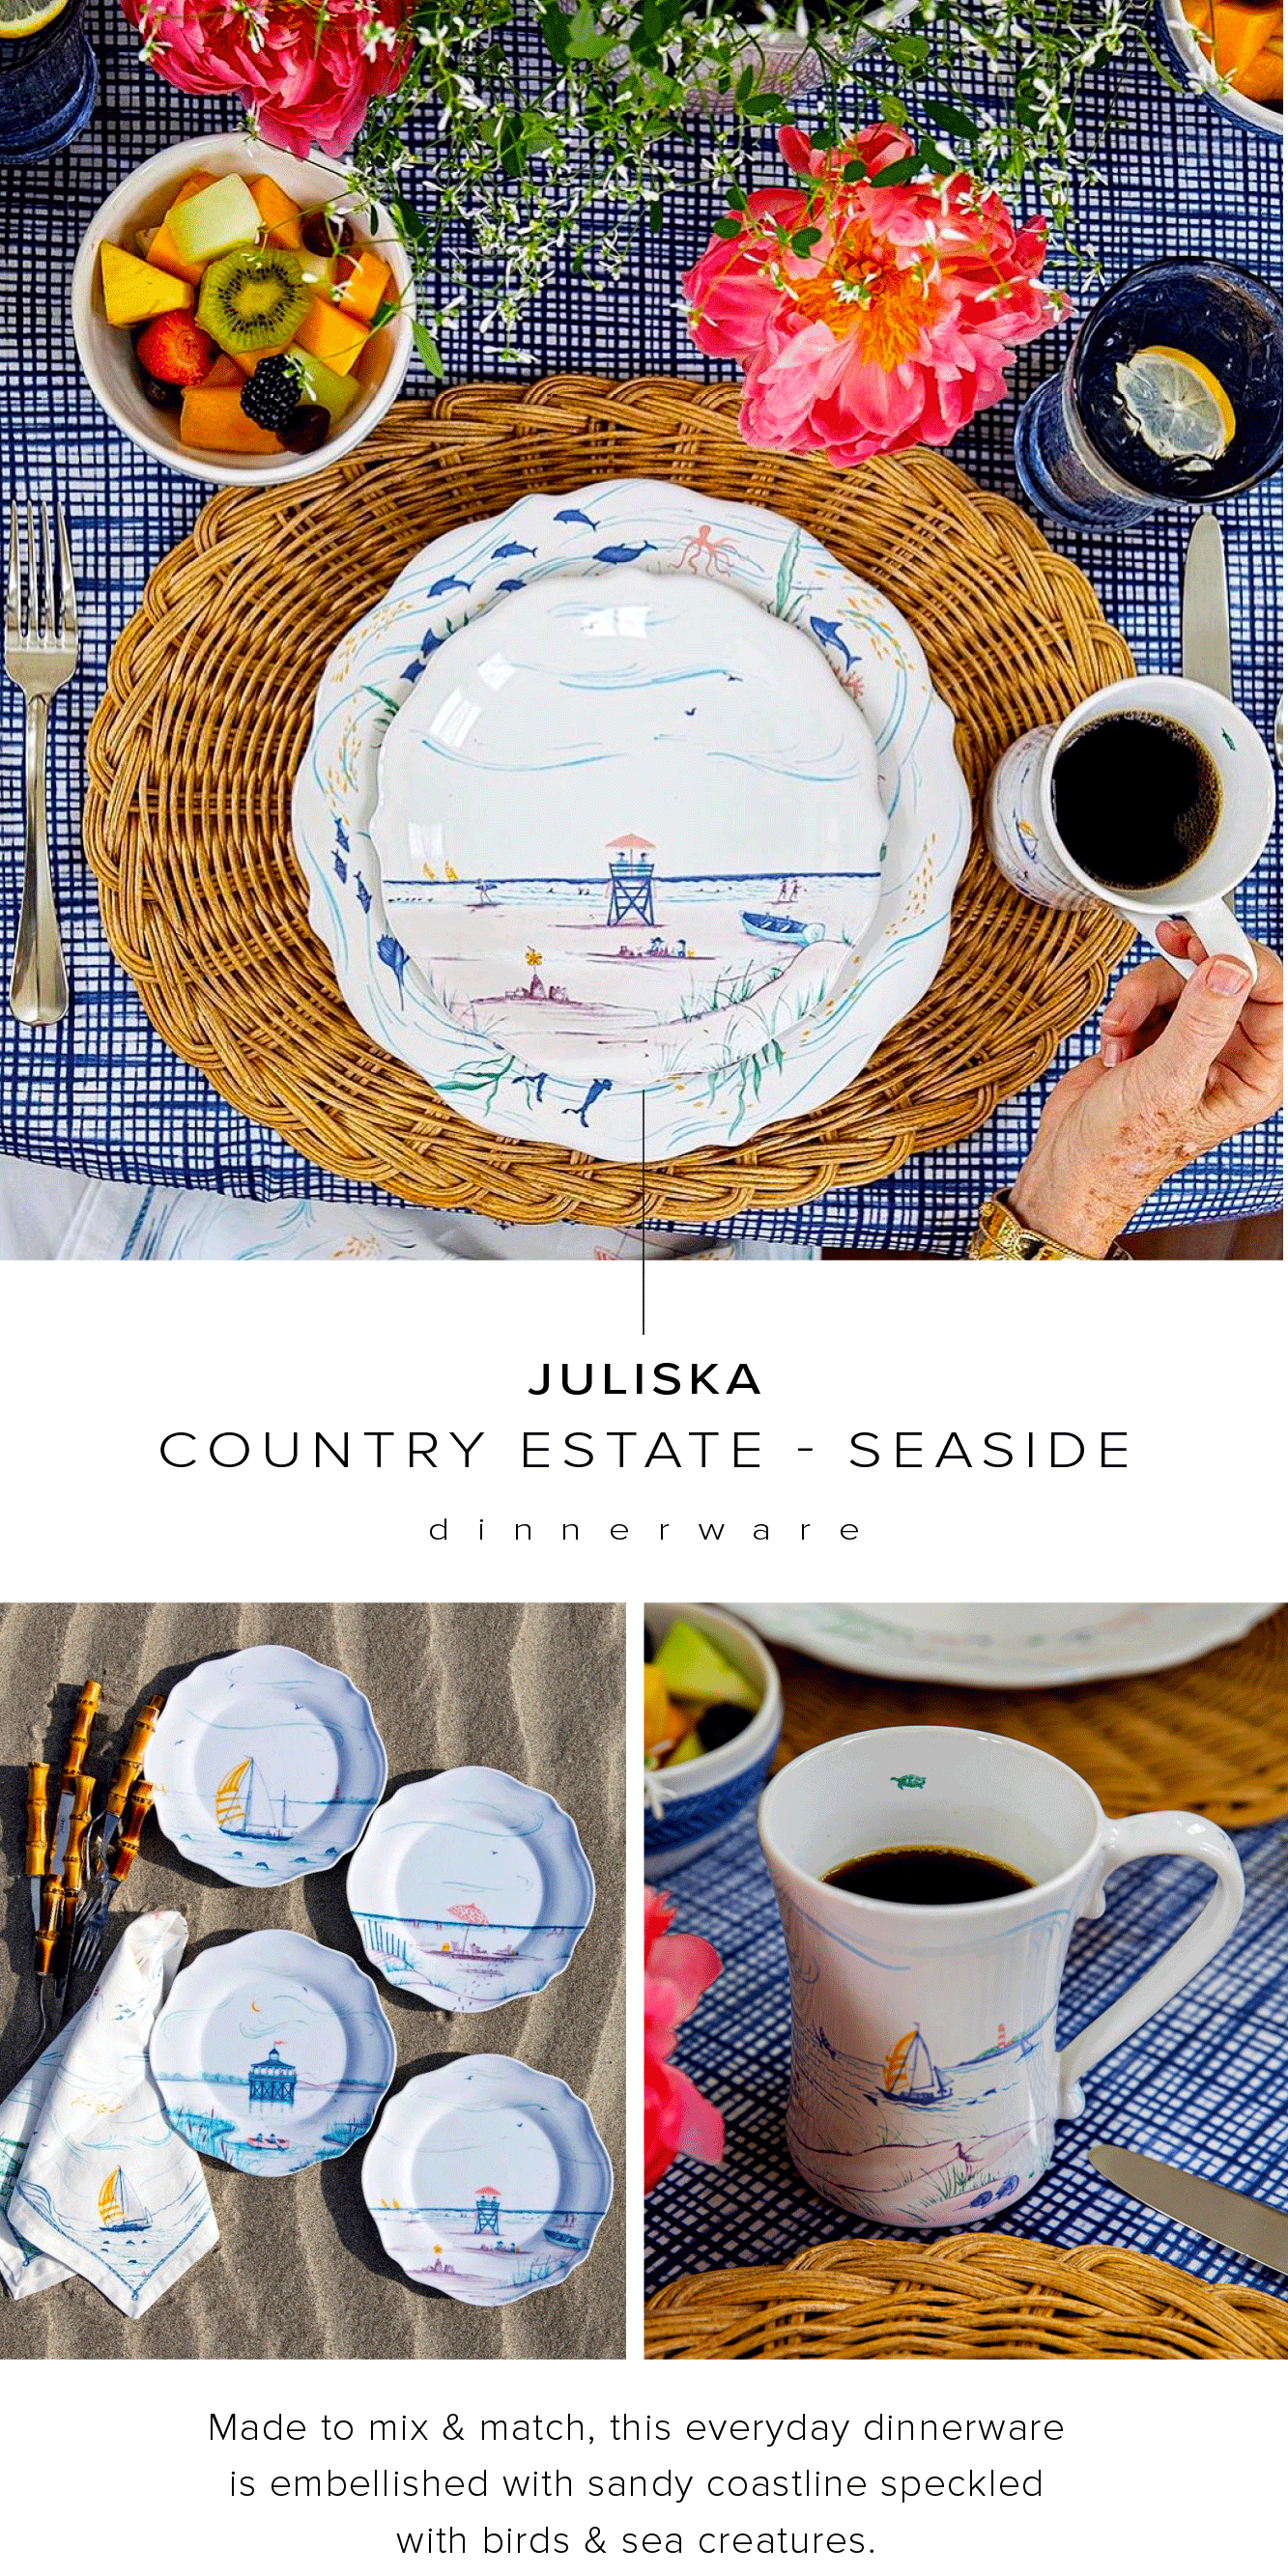  JULISKA COUNTRY ESTATE - SEASIDE dinnwerware Made to mix match, this everyday dinnerware is embellished with sandy coastline speckled with birds sea creatures. 